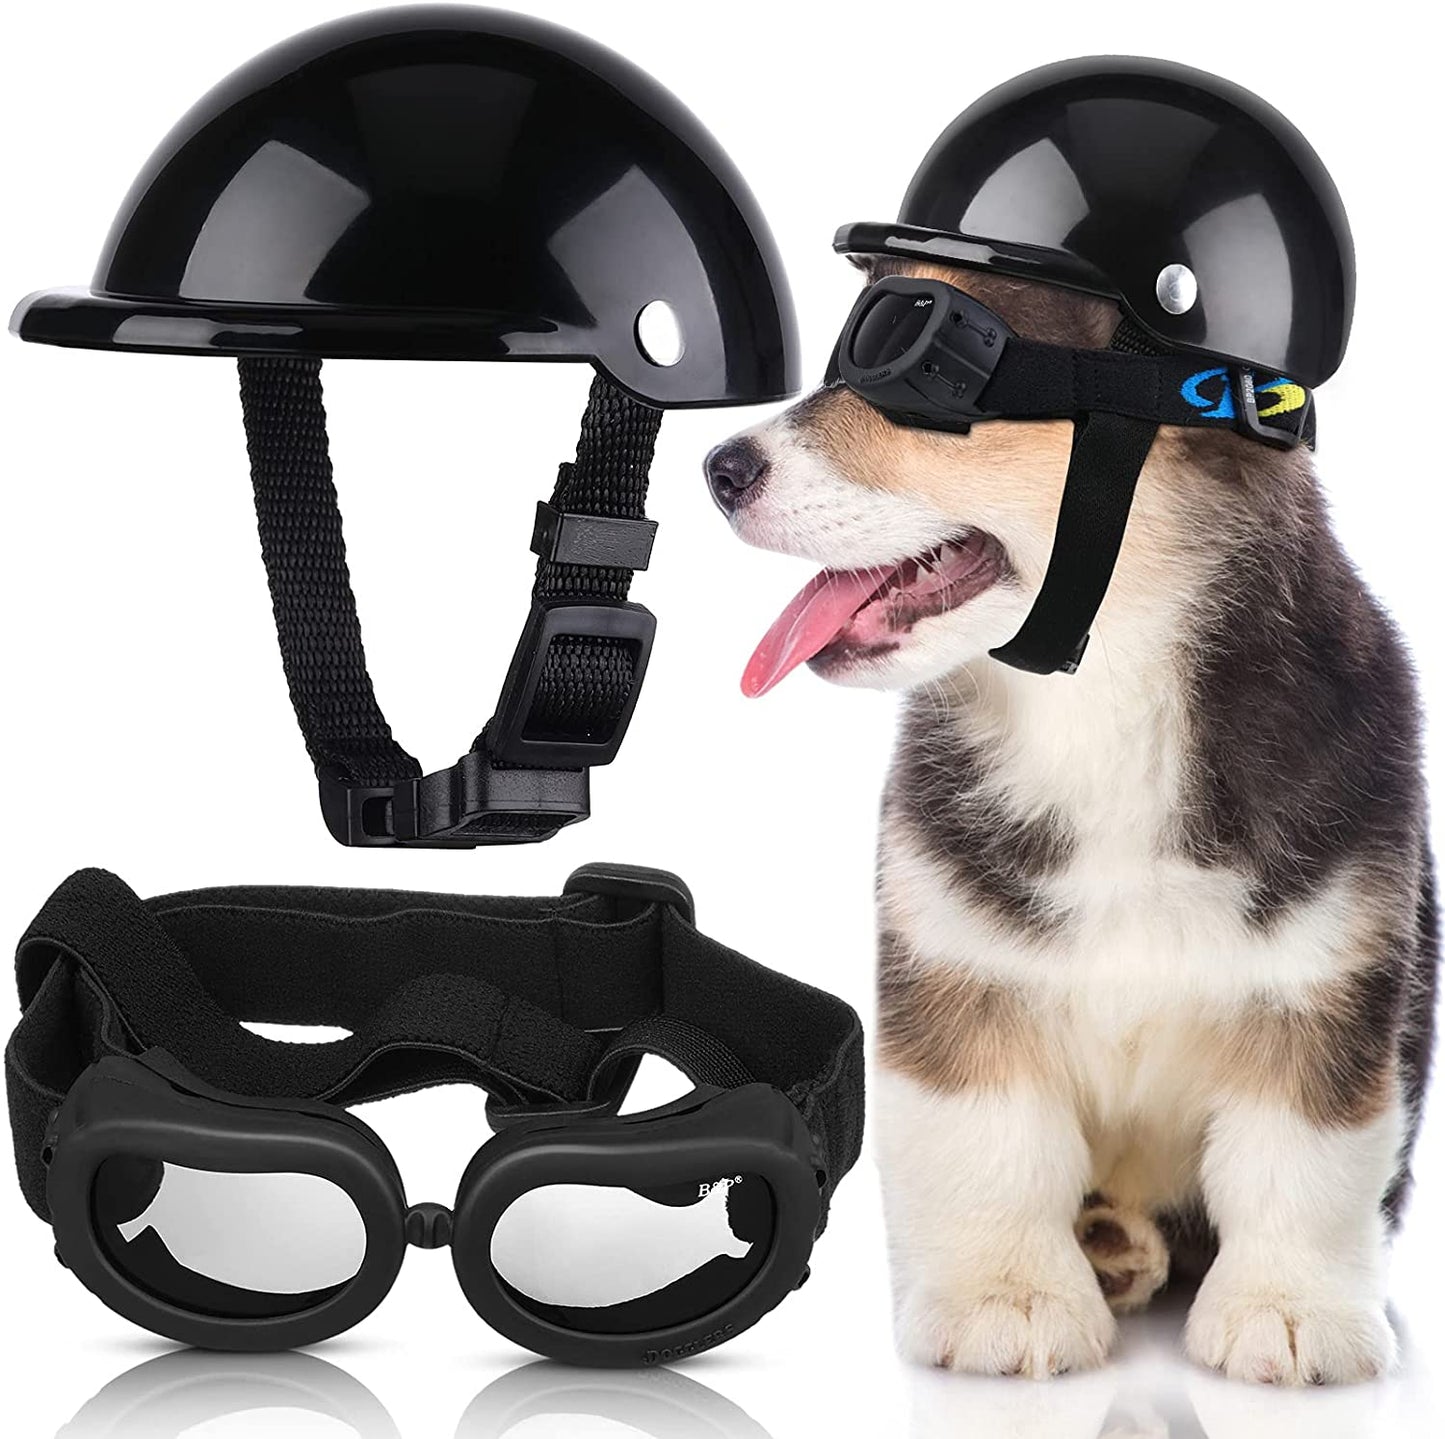 Sunglasses and Helmet with Goggles